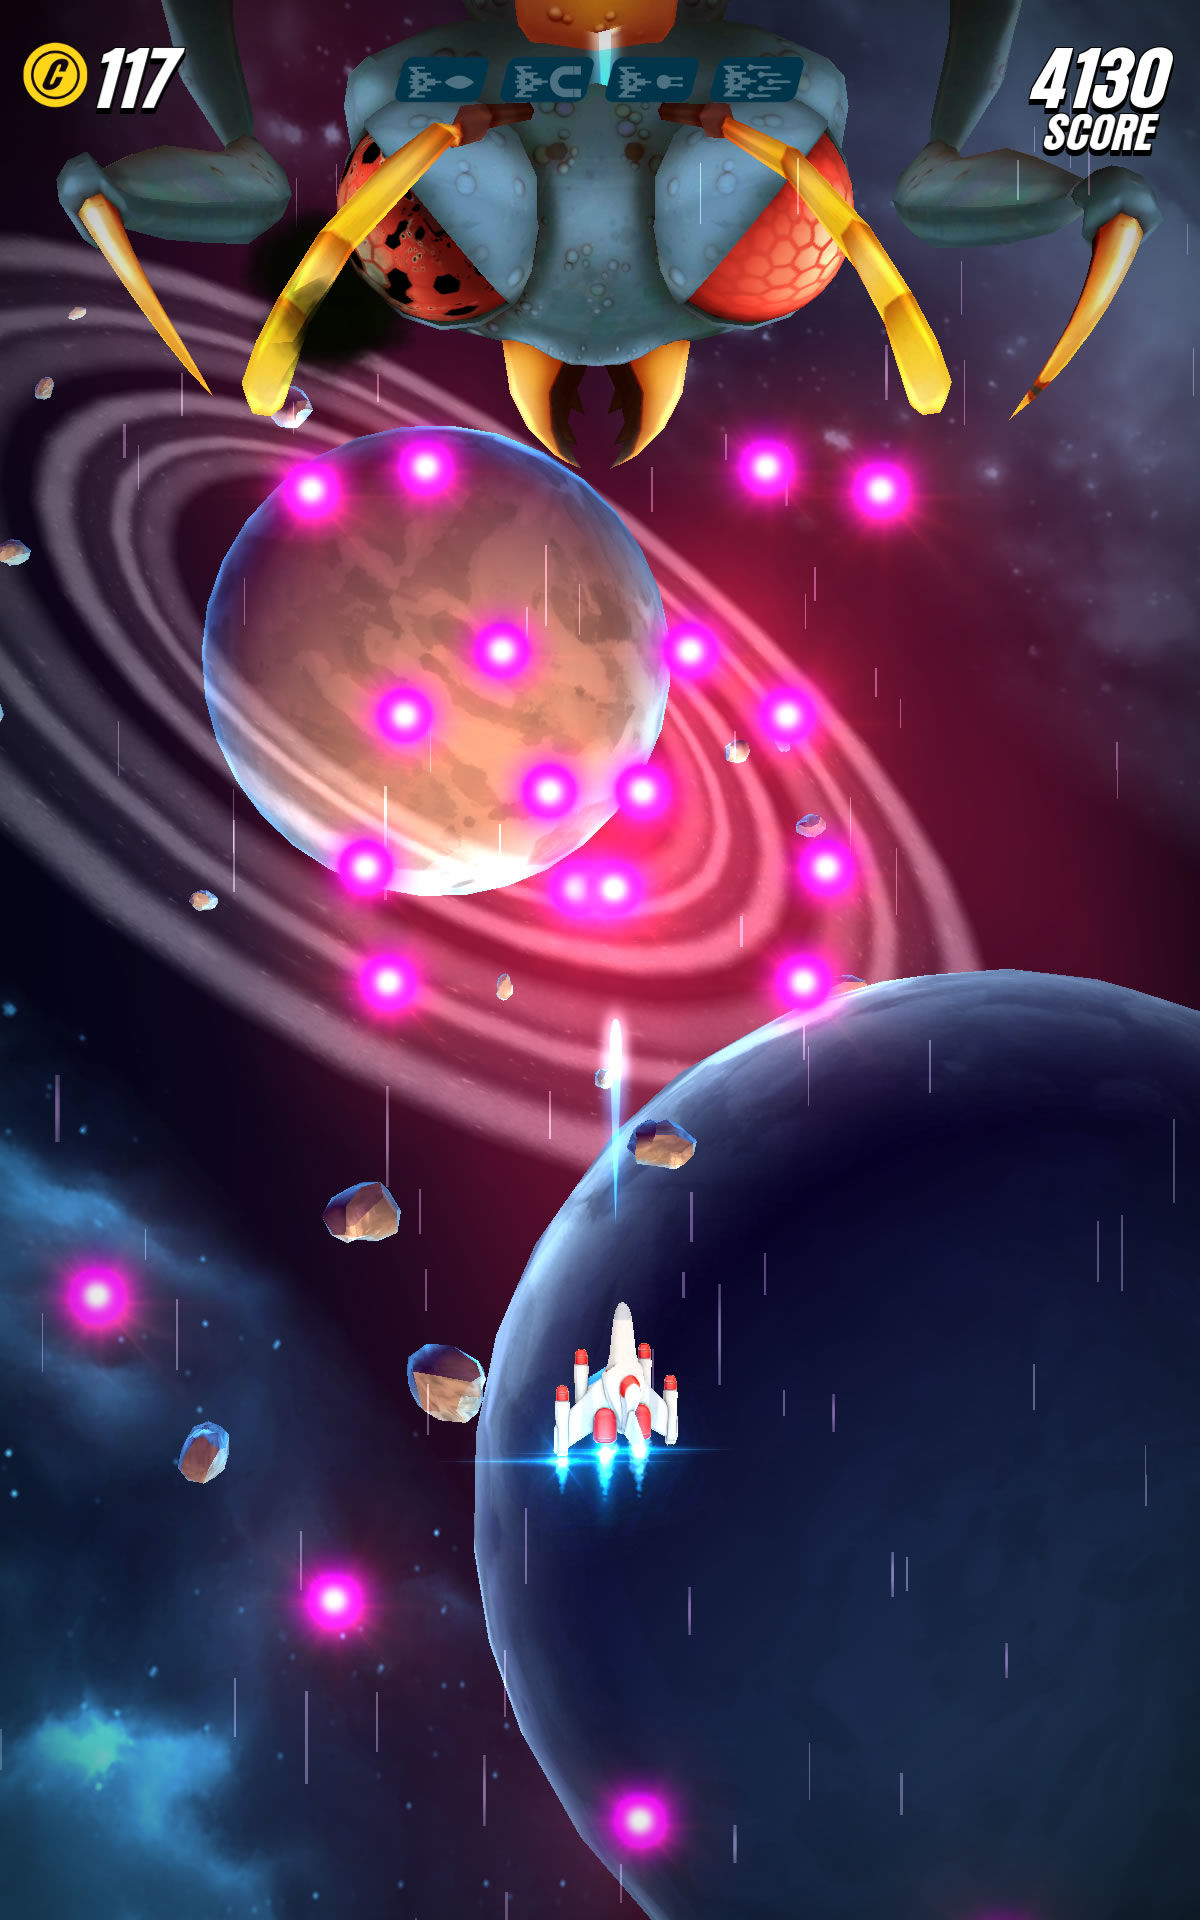 Galaga Wars also added large new bosses to contend with